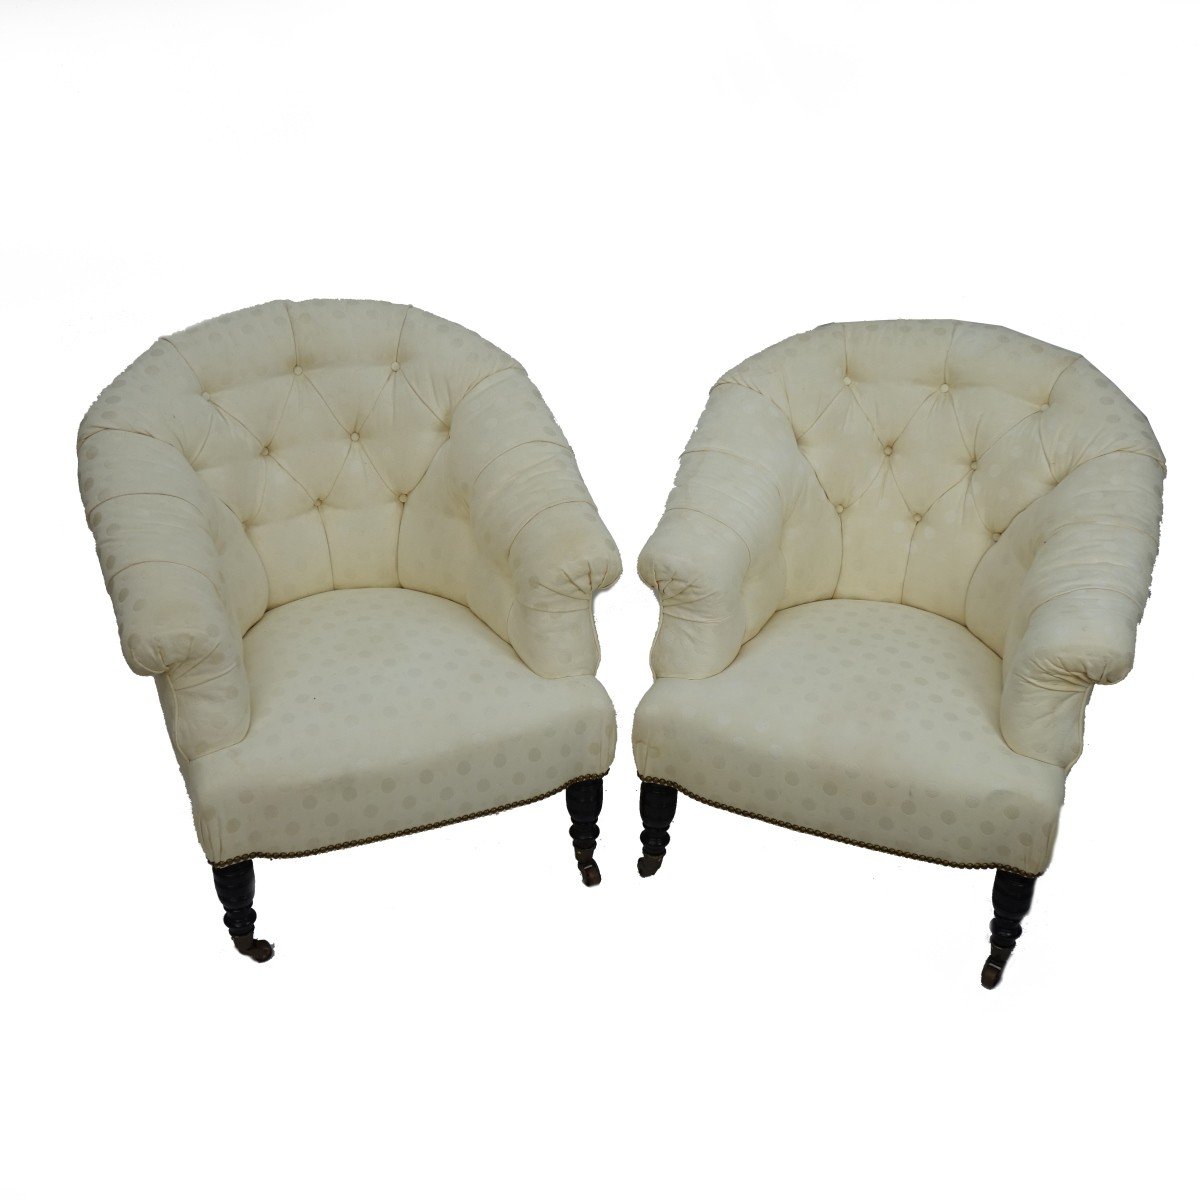 Pair of Upholstered Barrel Chairs